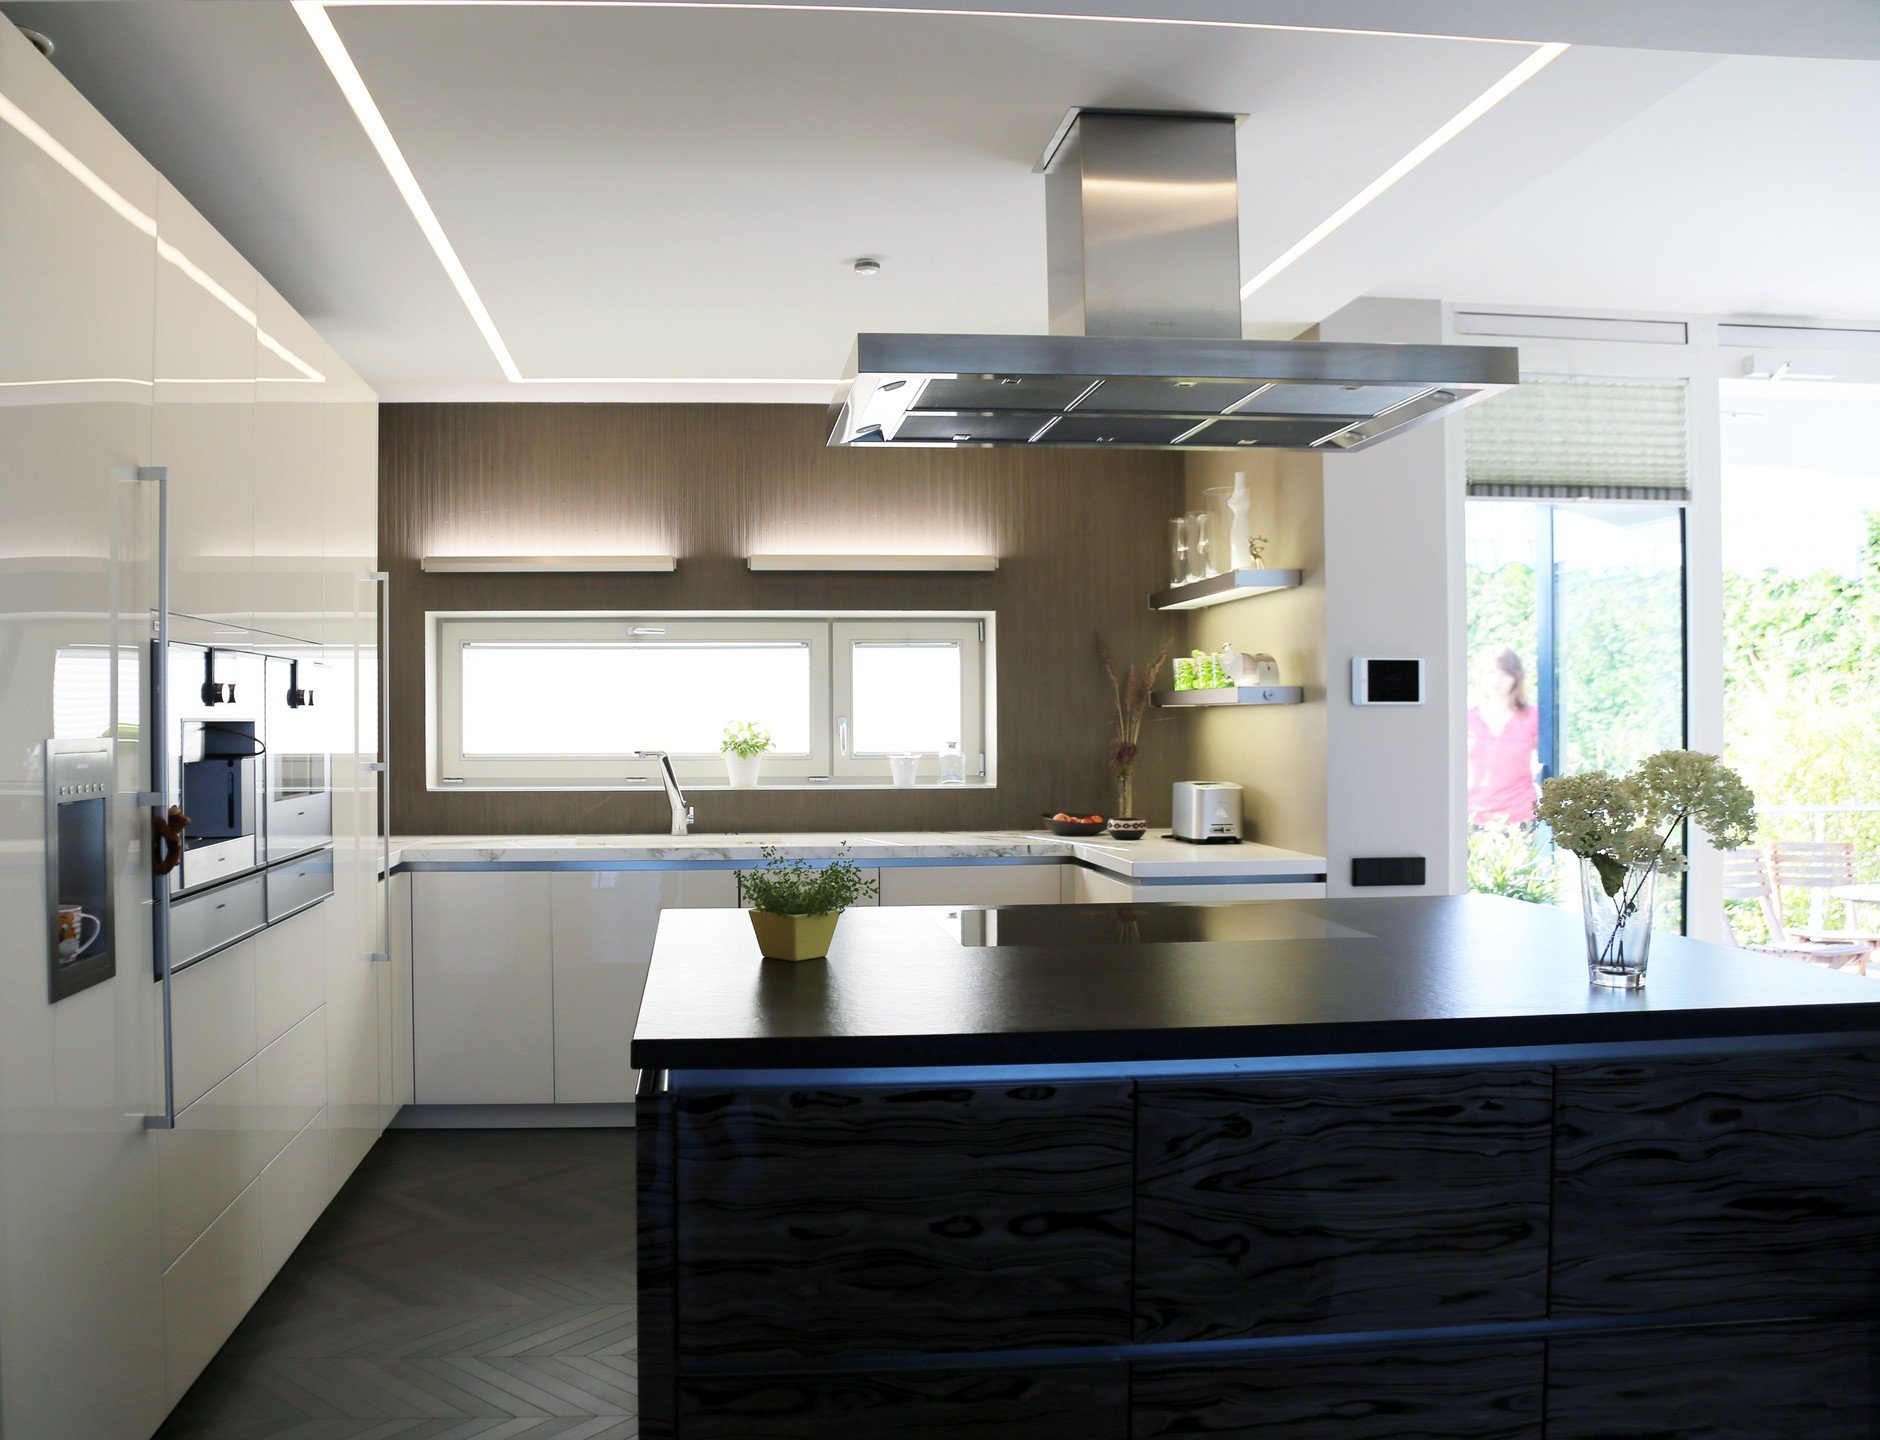 &quot;Illuminate your culinary space with sleek, high-gloss finishes, marrying contrasting patterns and textures for a kitchen that's both modern and inviting. Seamless counters and cleverly concealed storage solutions elevate functionality without c